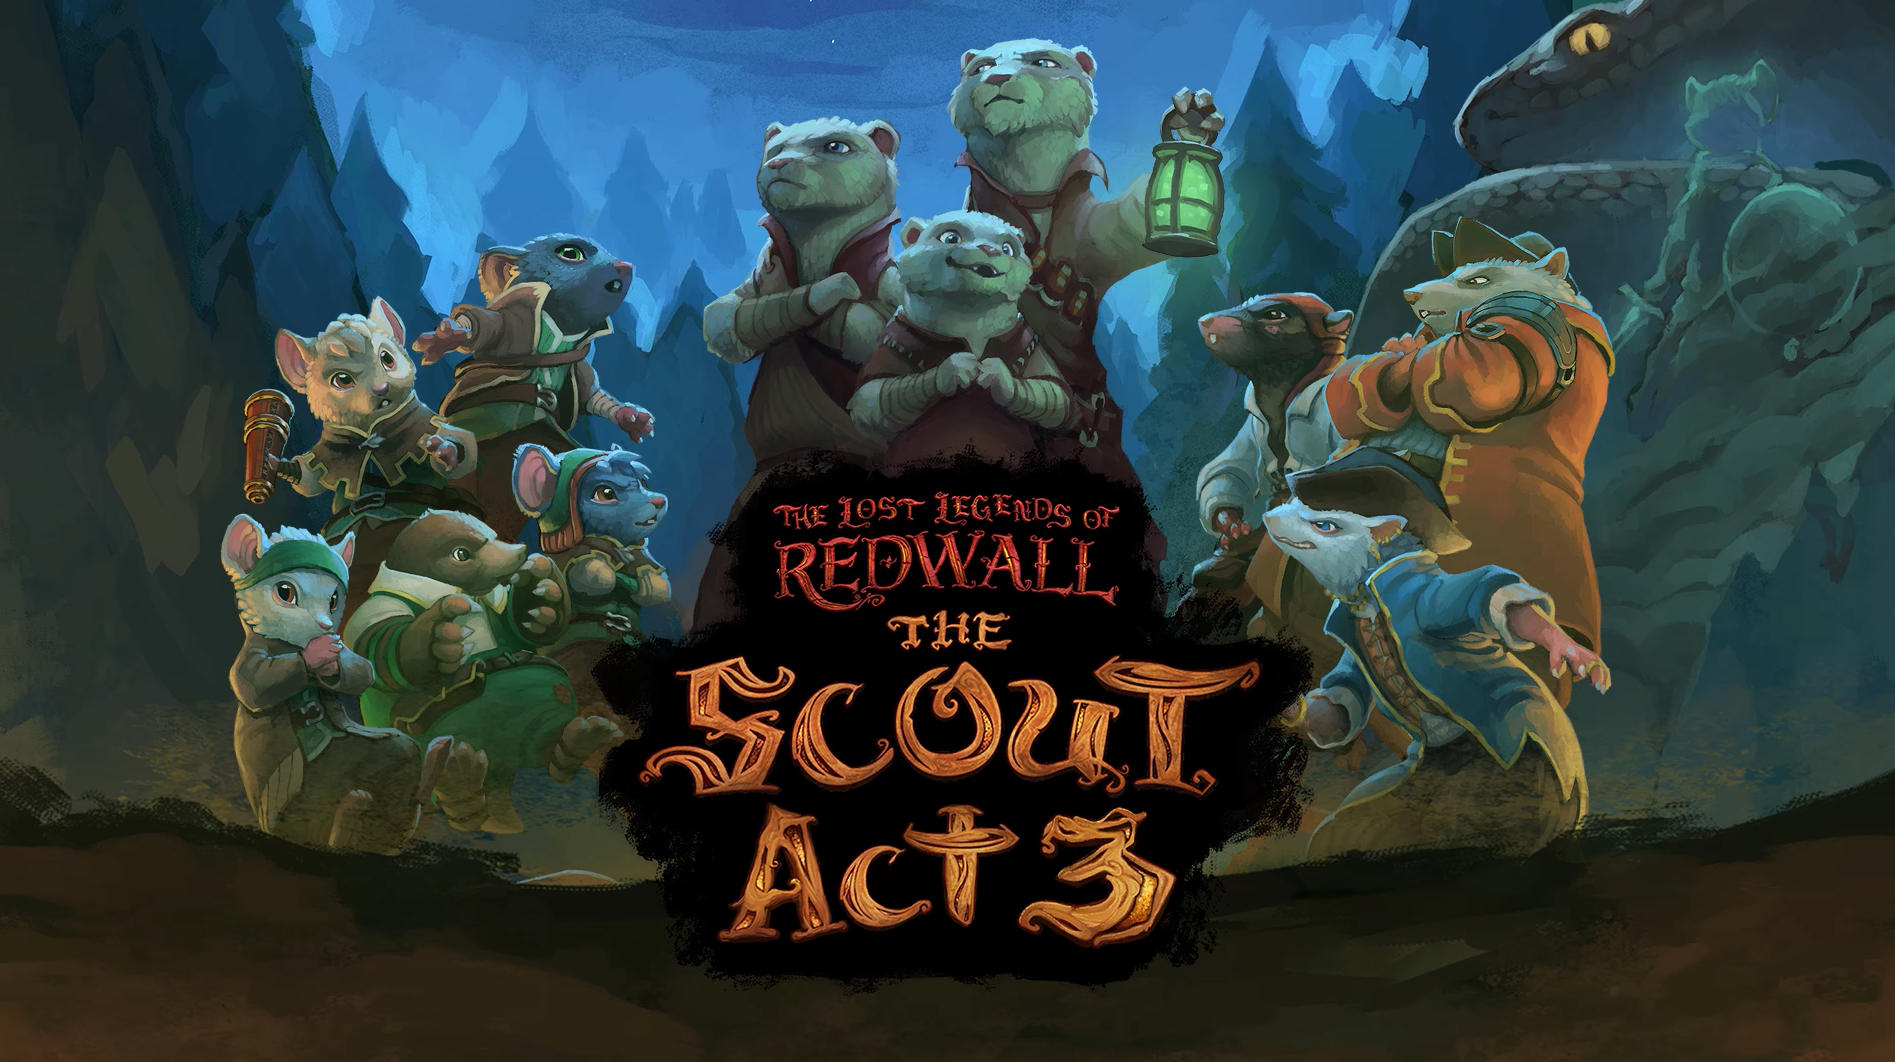 The lost legends of redwall. The Lost Legends of Redwall : the Scout. The Lost Legends of Redwall the Scout Act 3. Redwall Abbey игра.